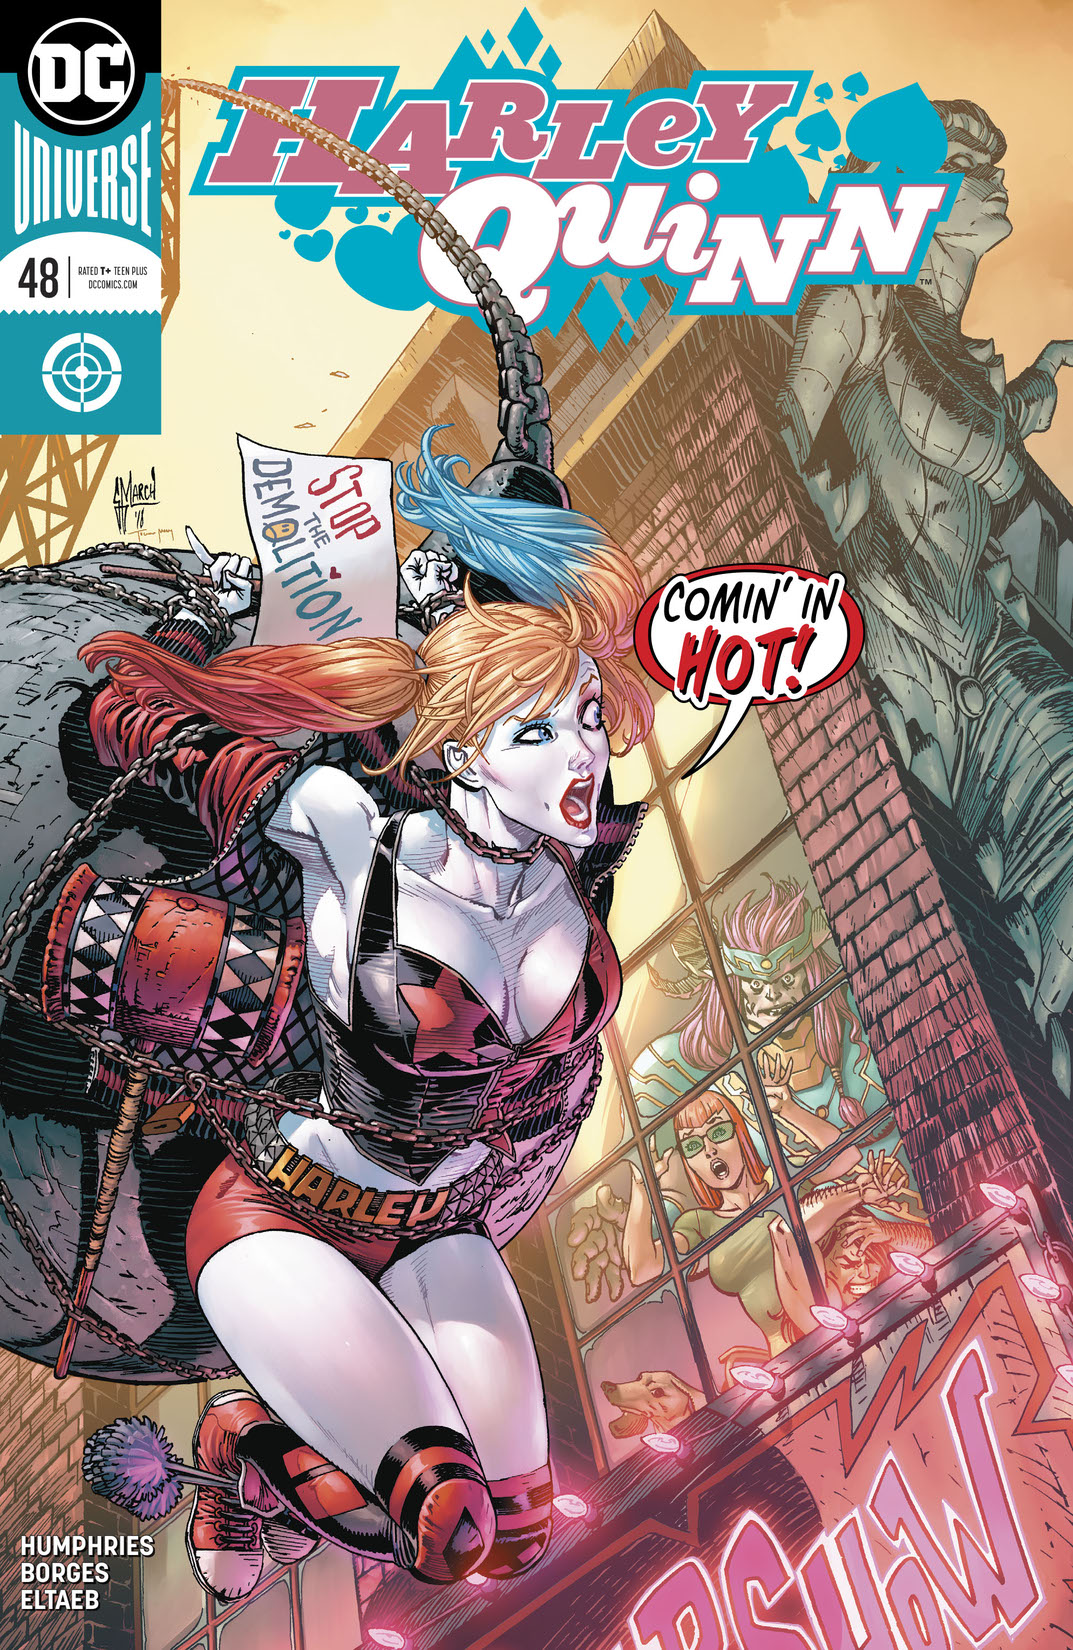 Harley Quinn (2016-) #48 preview images